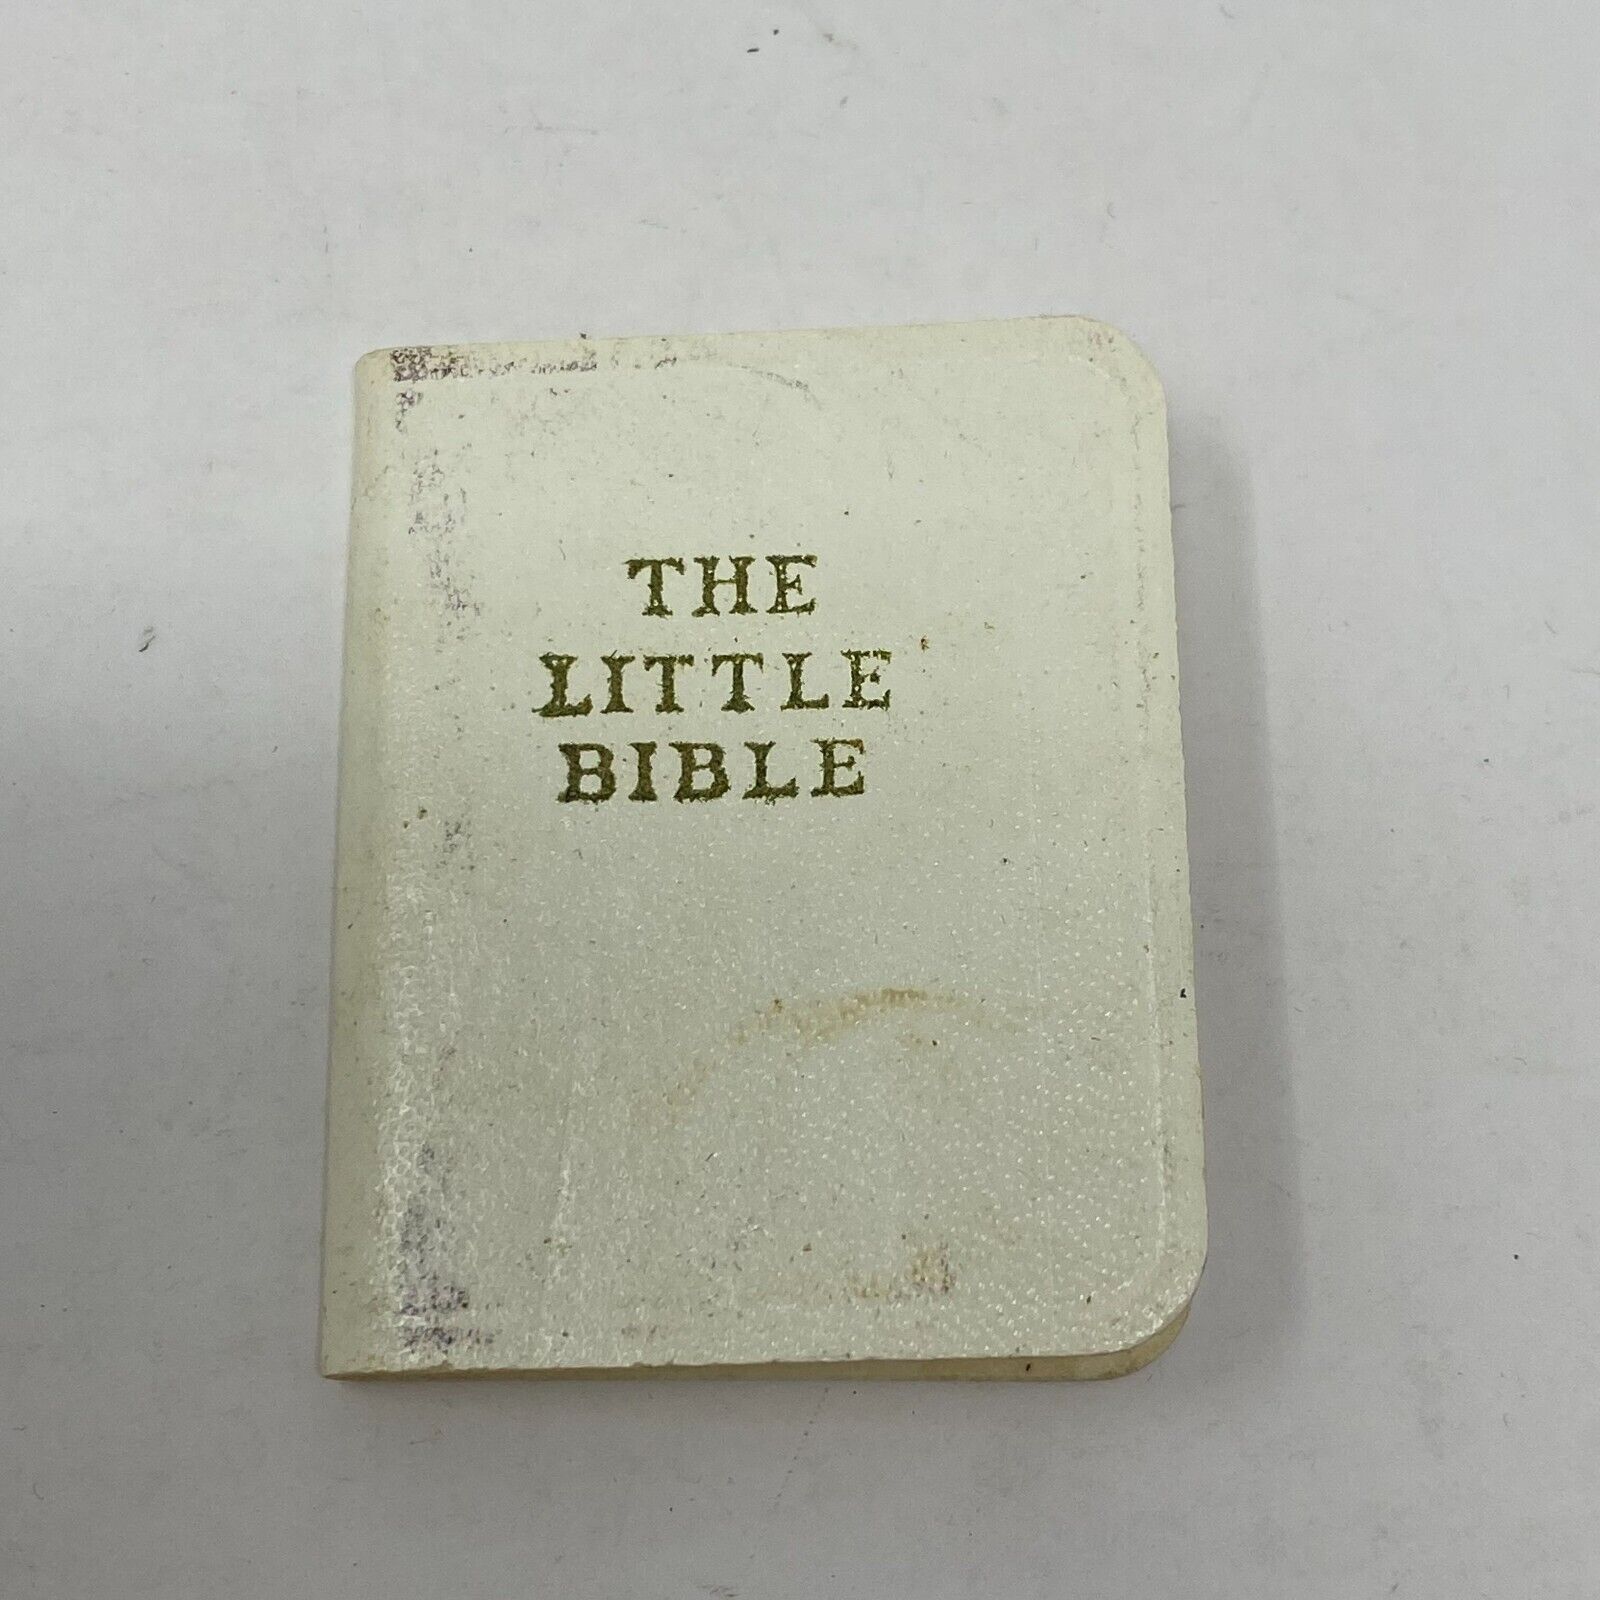 The Little Bible Old Testament David C. Cook Publinshing Co Printed In the USA